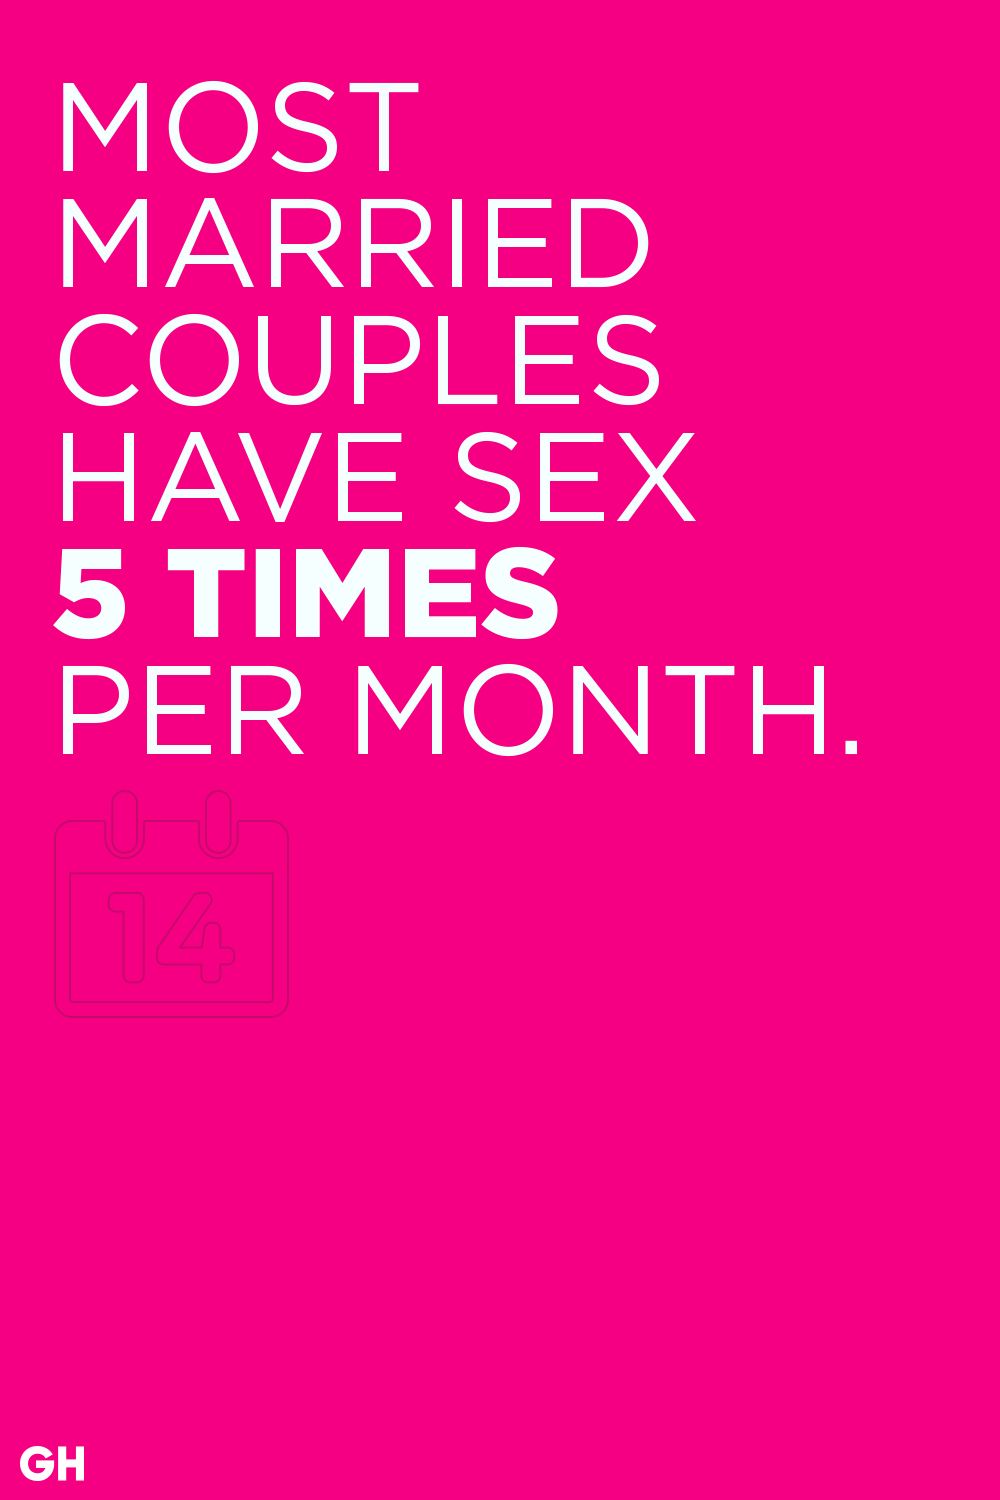 10 Surprising Statistics About Married image pic